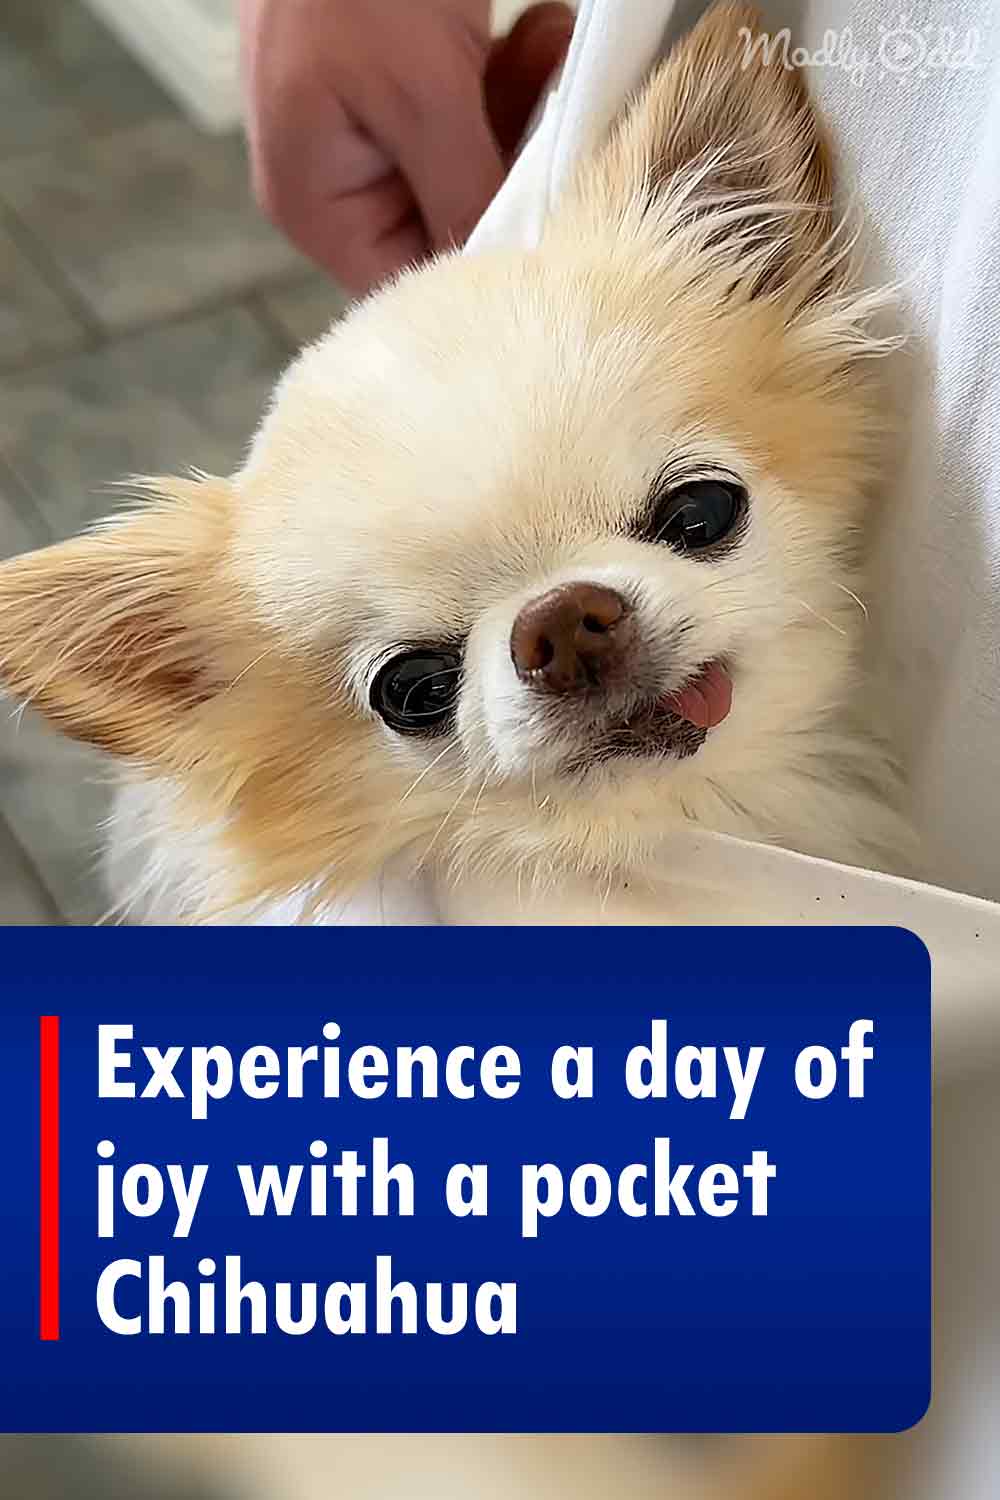 Experience a day of joy with a pocket Chihuahua